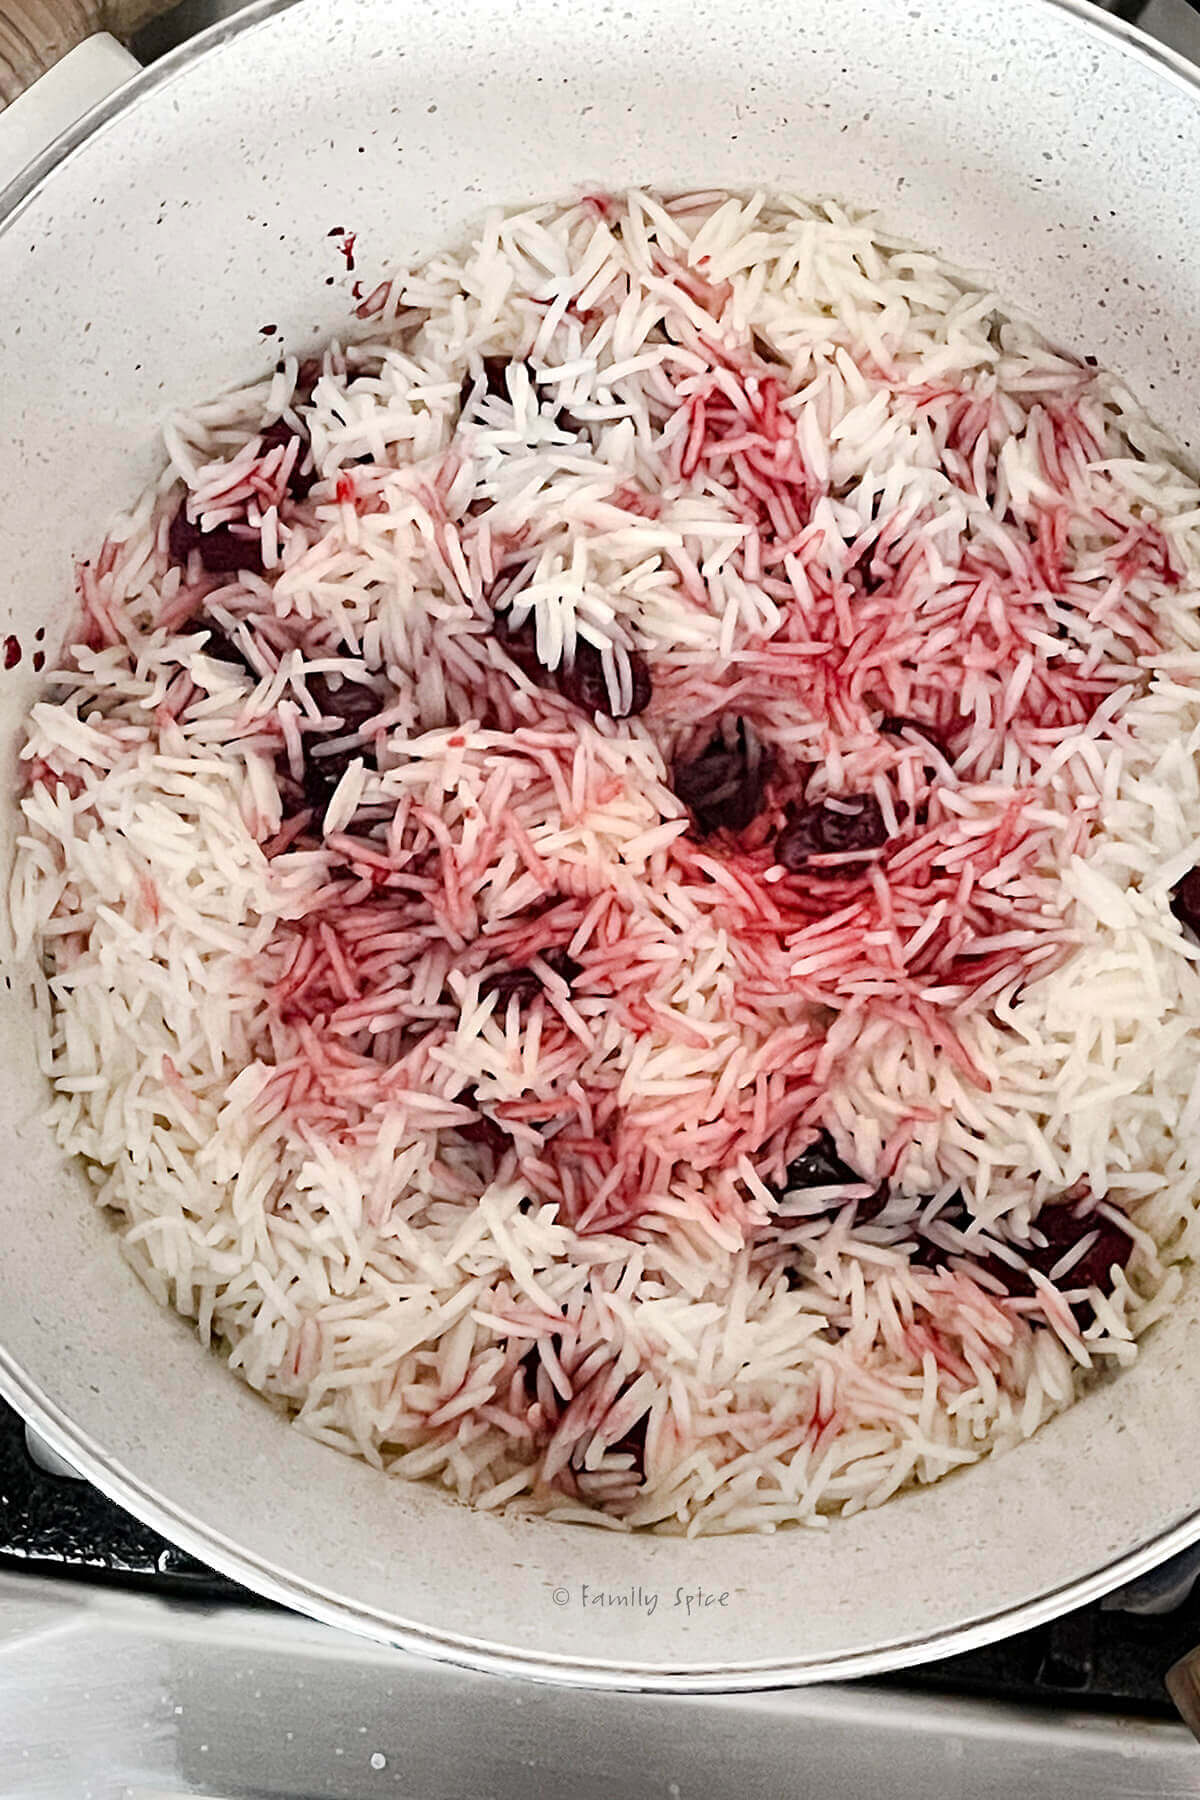 More layers of basmati rice, sour cherries and syrup in a pot